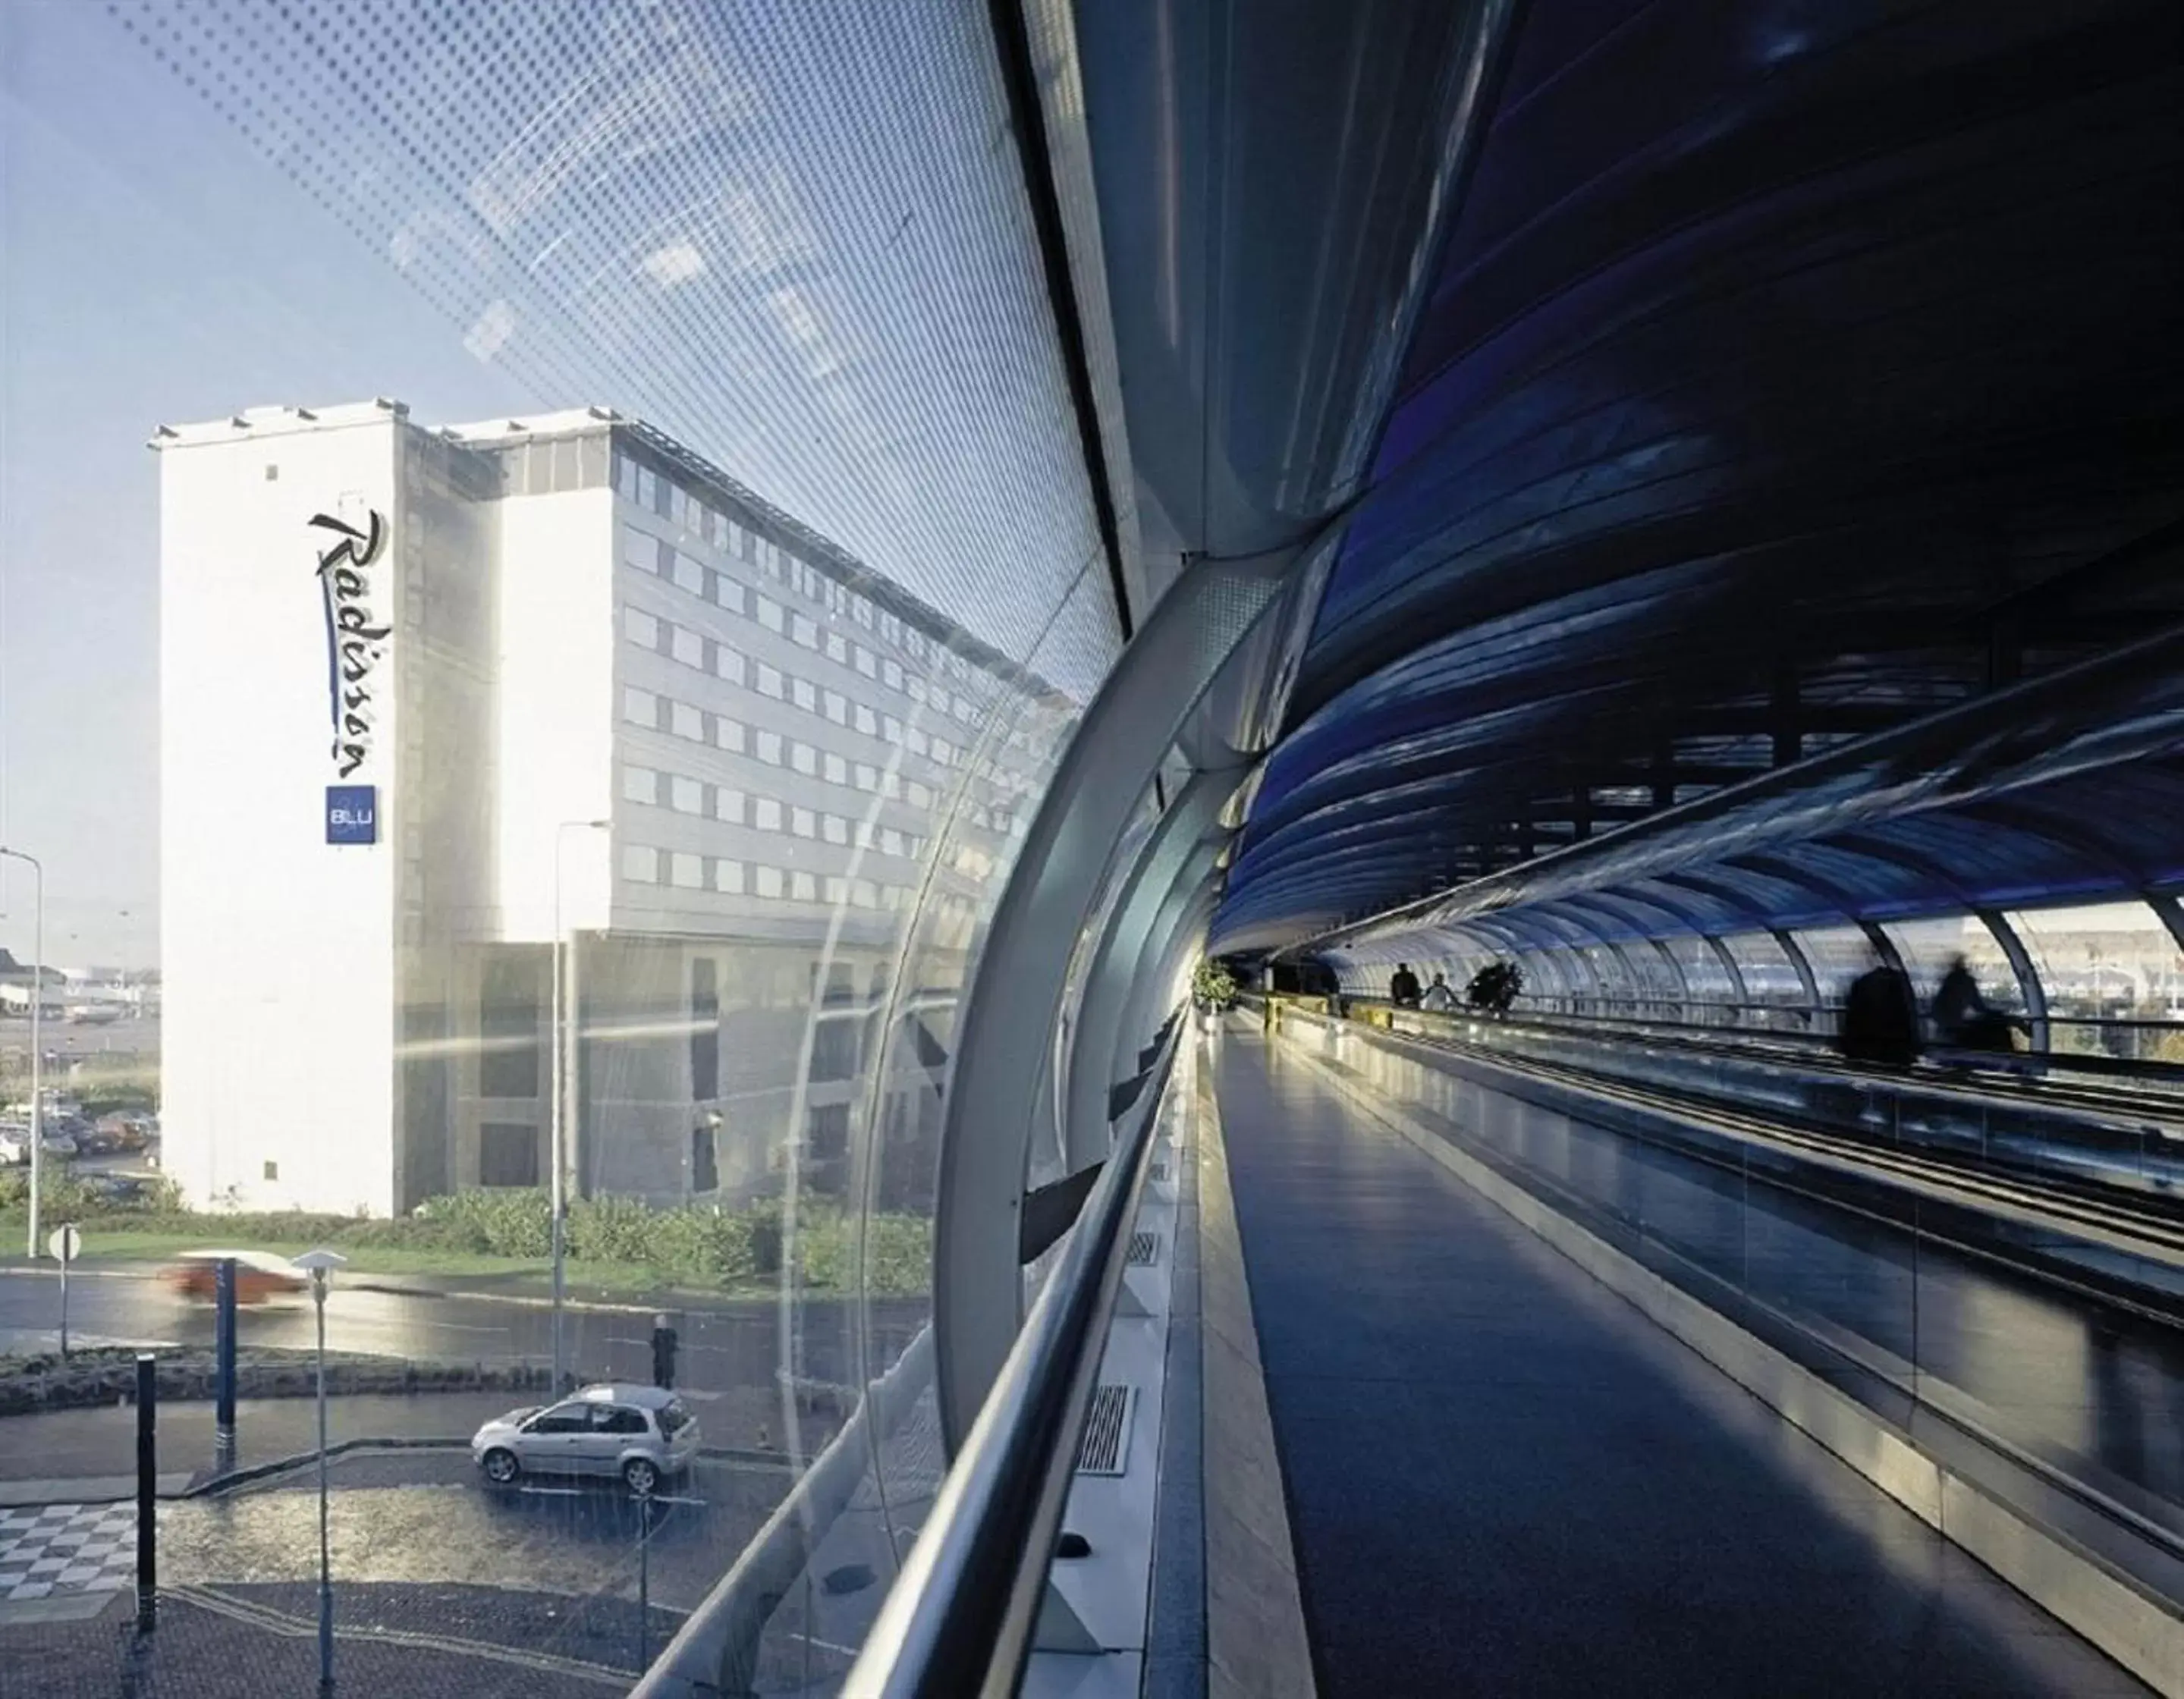 Property building in Radisson Blu Manchester Airport